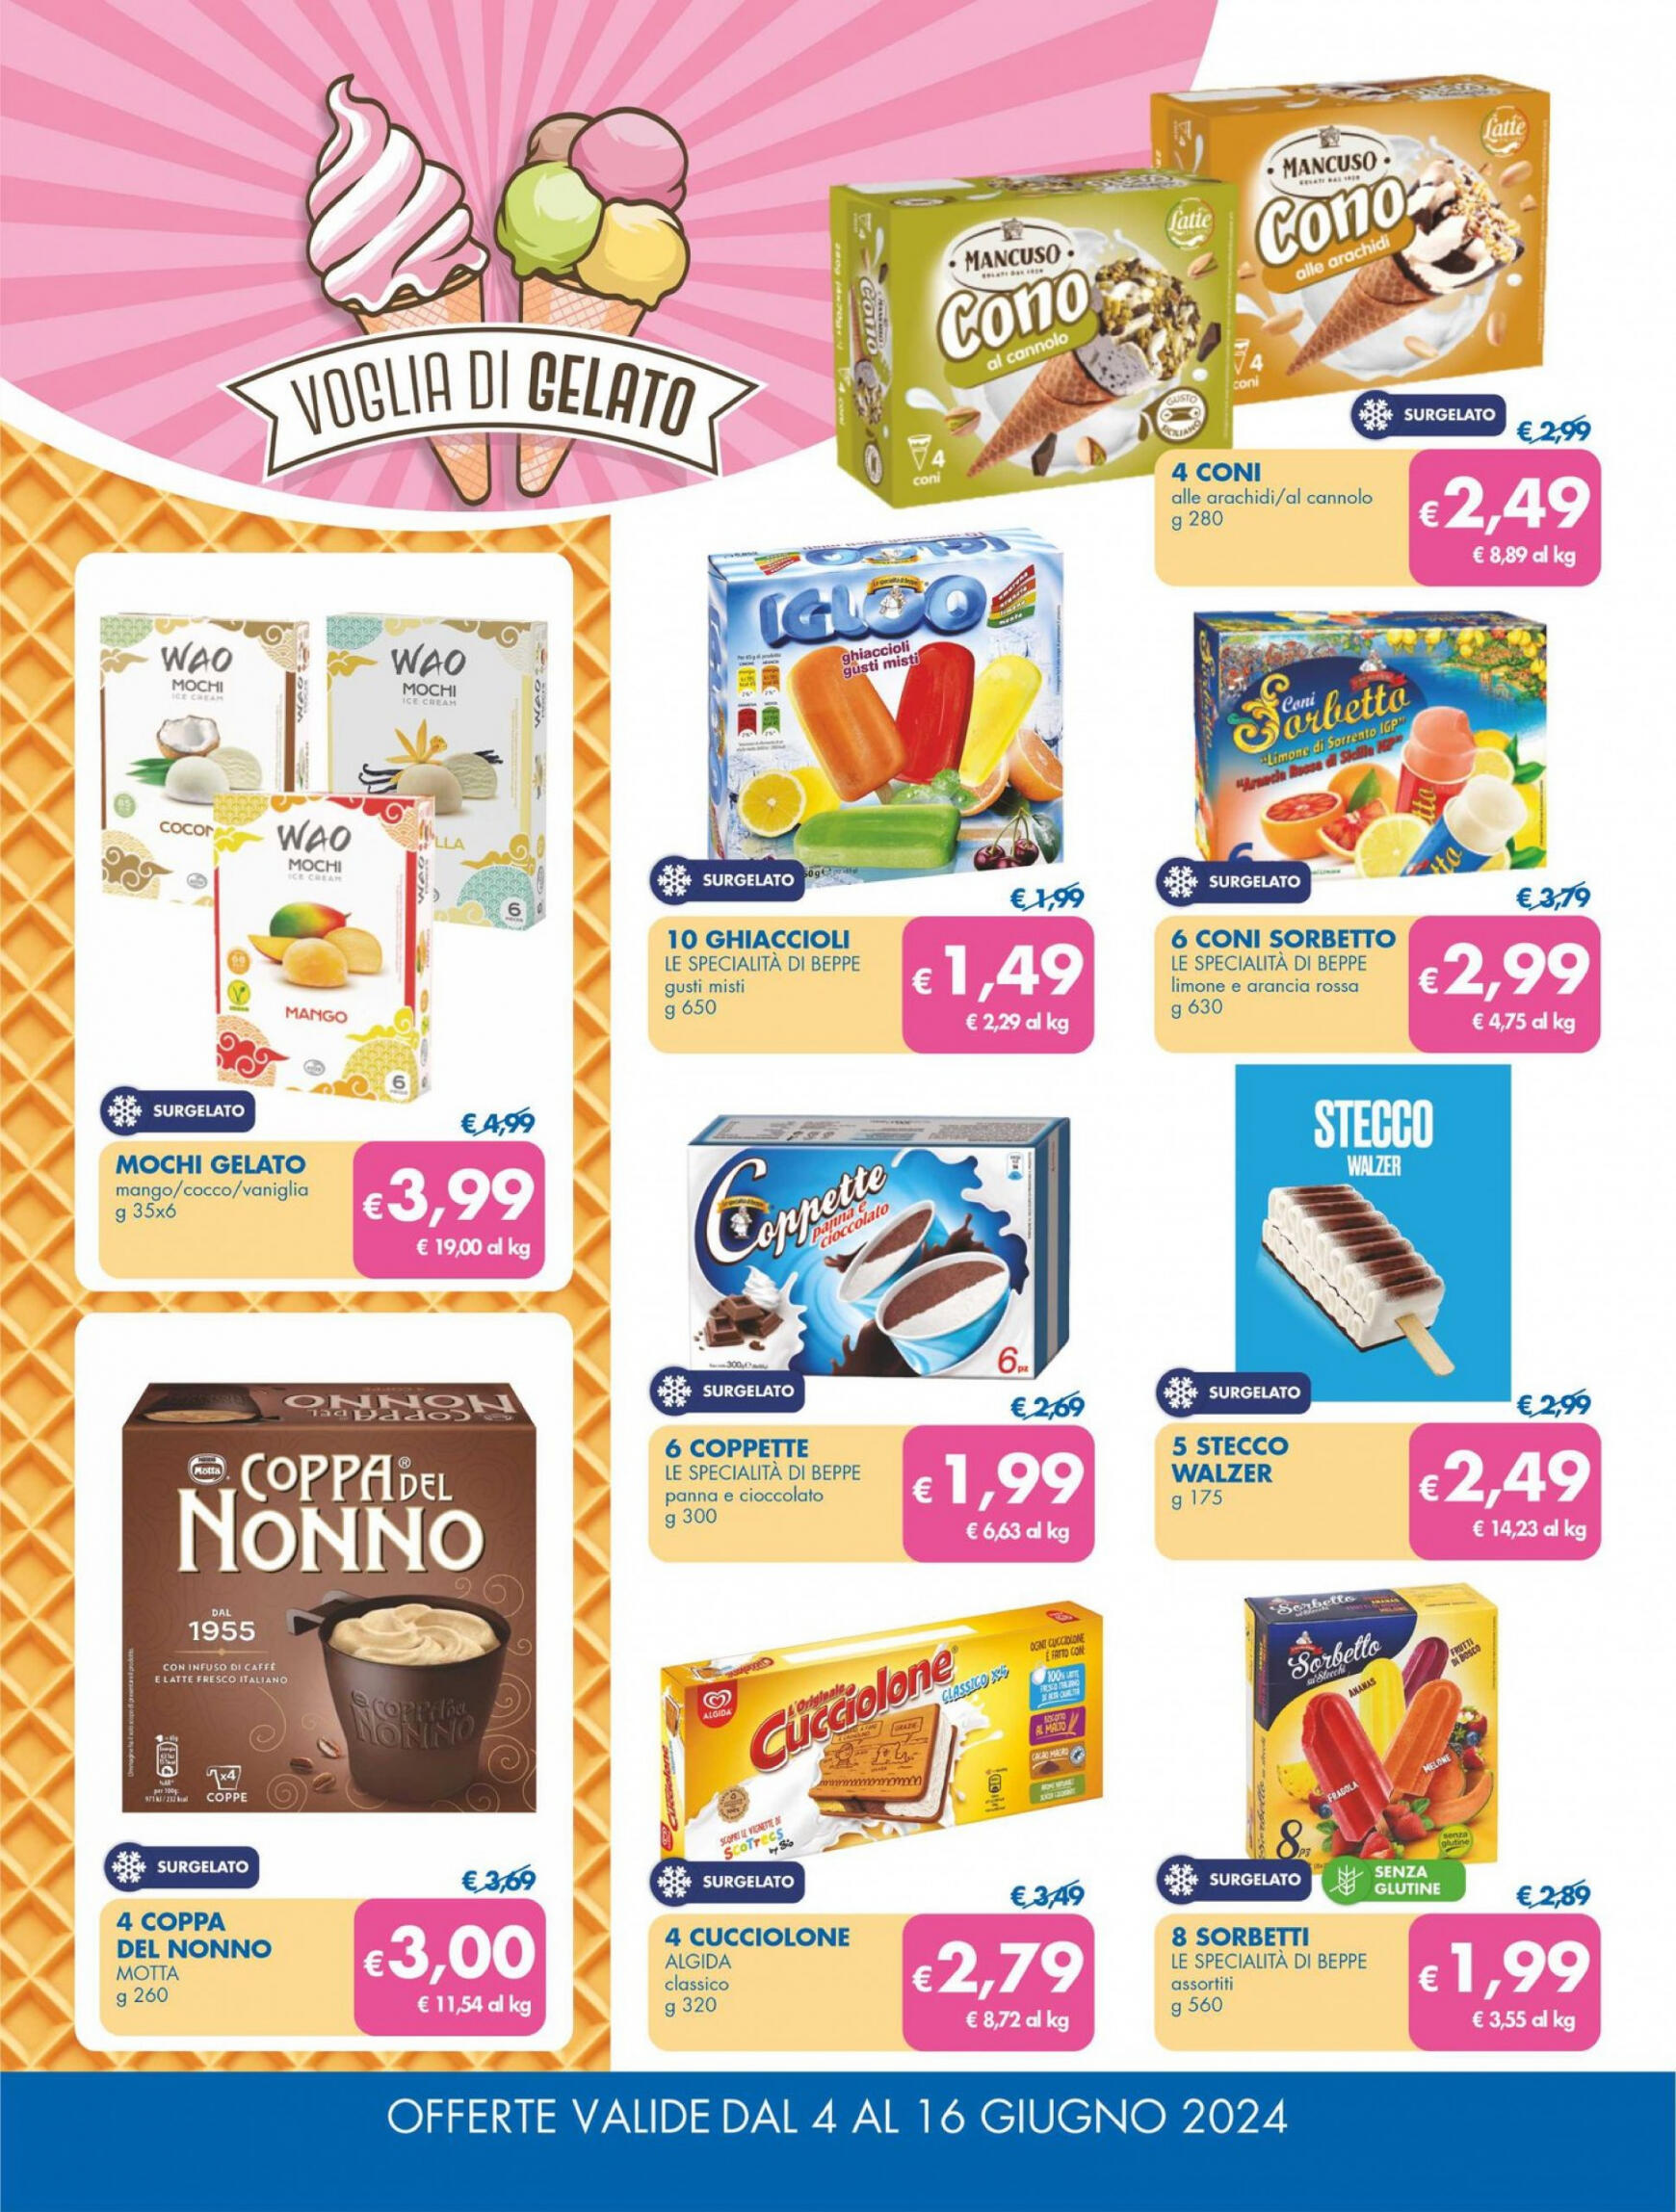 md-discount - Nuovo volantino MD 04.06. - 16.06. - page: 3